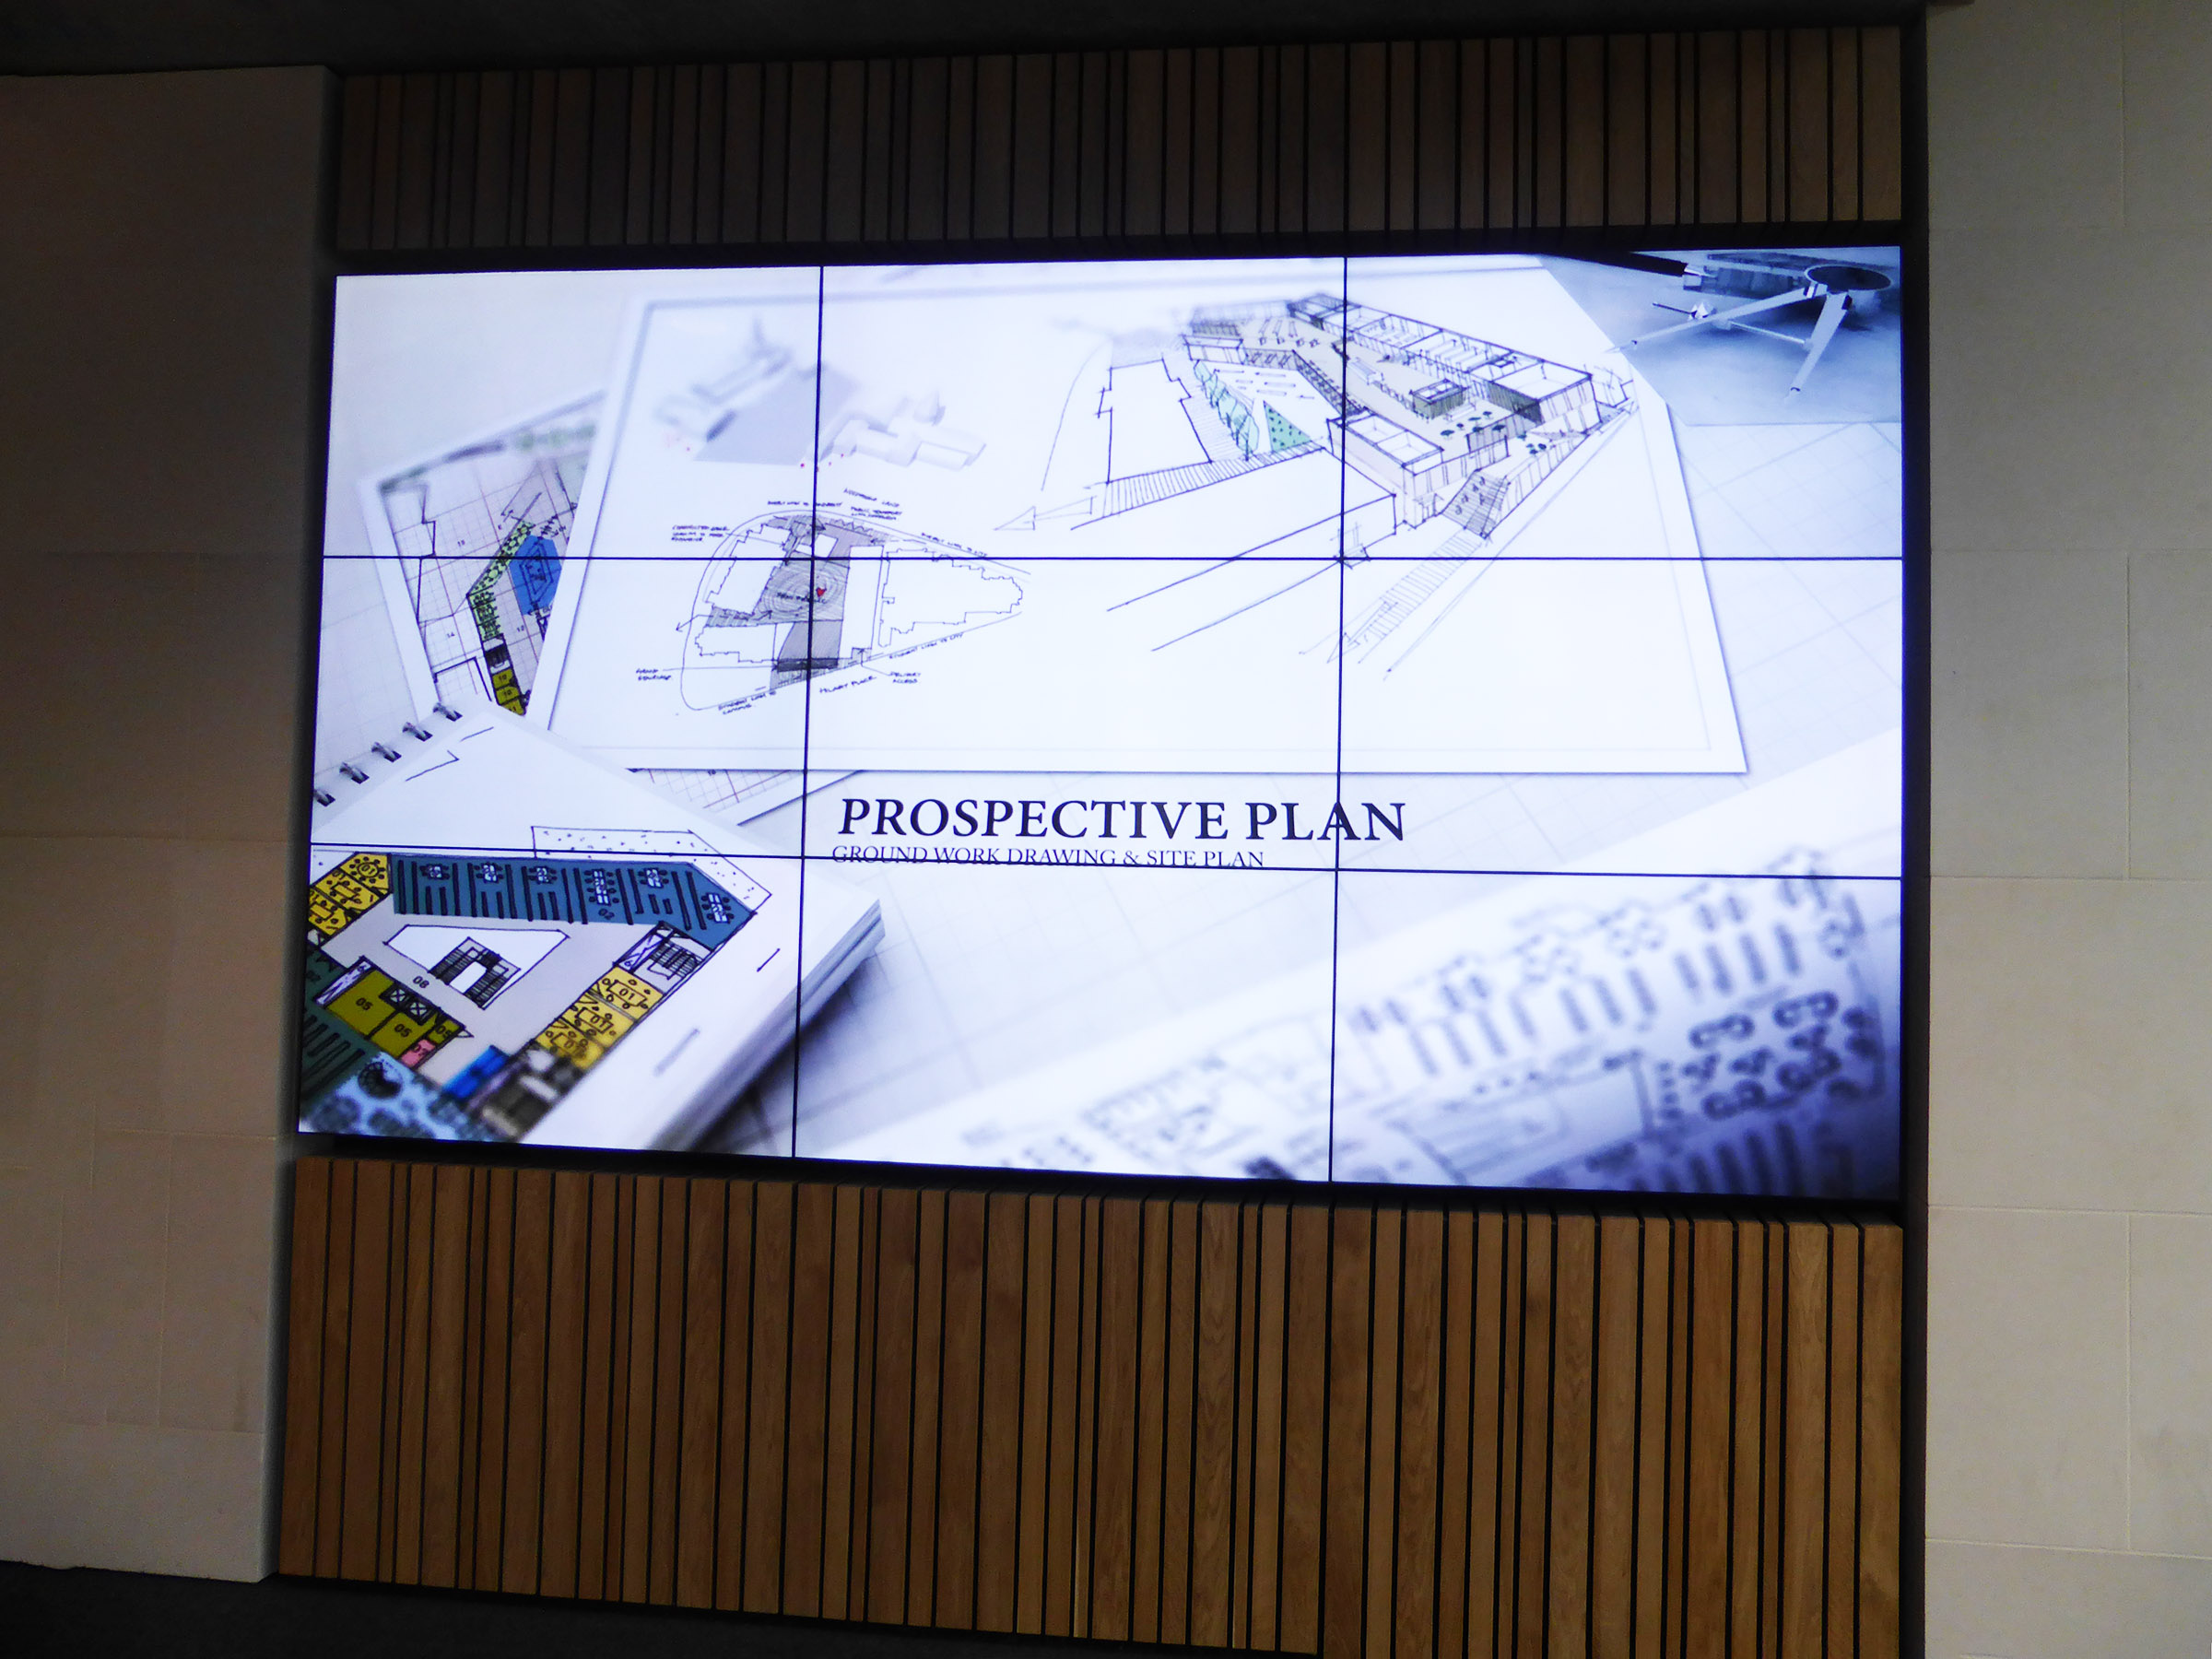 video wall in a library atrium showing architectural plans